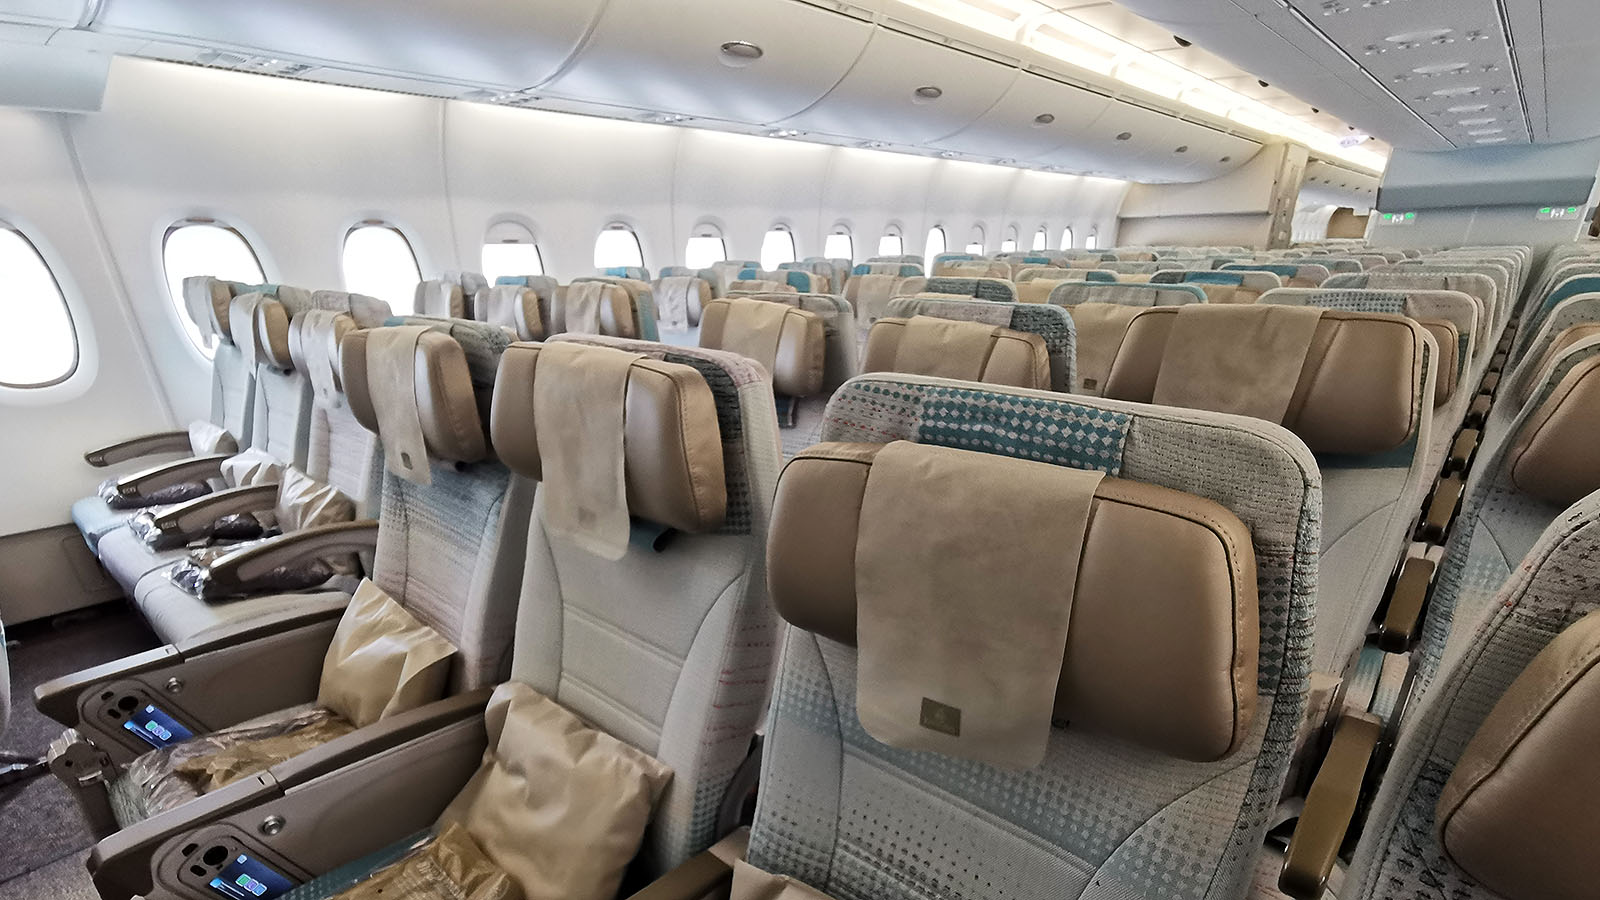 Side view of Emirates' Economy Class seating on the Airbus A380 from Melbourne